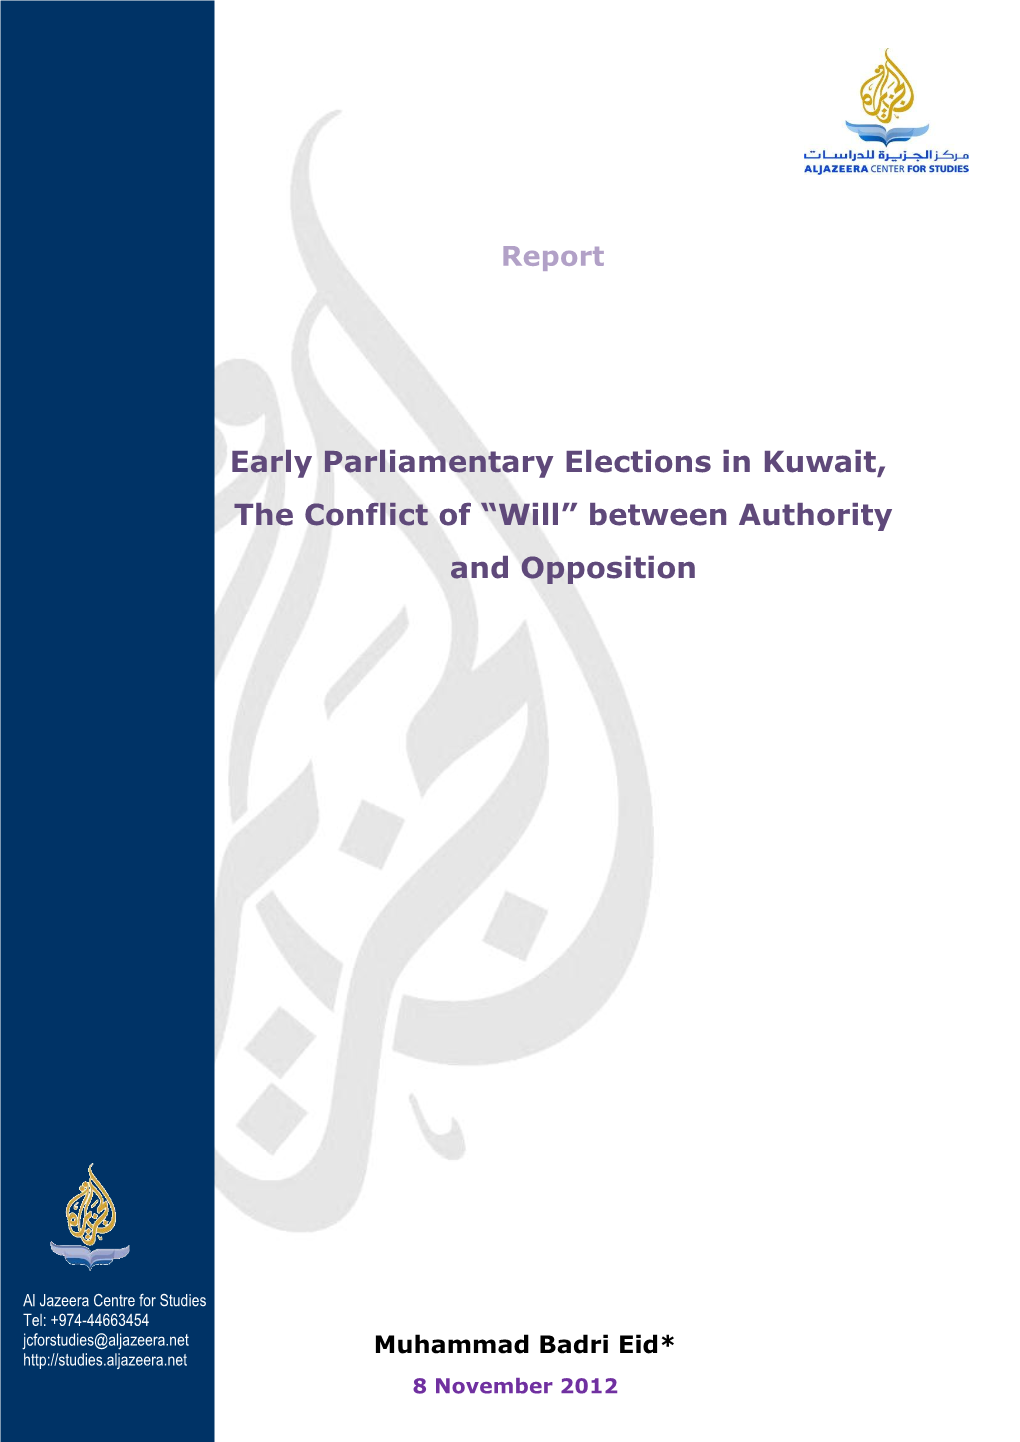 Early Parliamentary Elections in Kuwait, the Conflict of “Will” Between Authority and Opposition